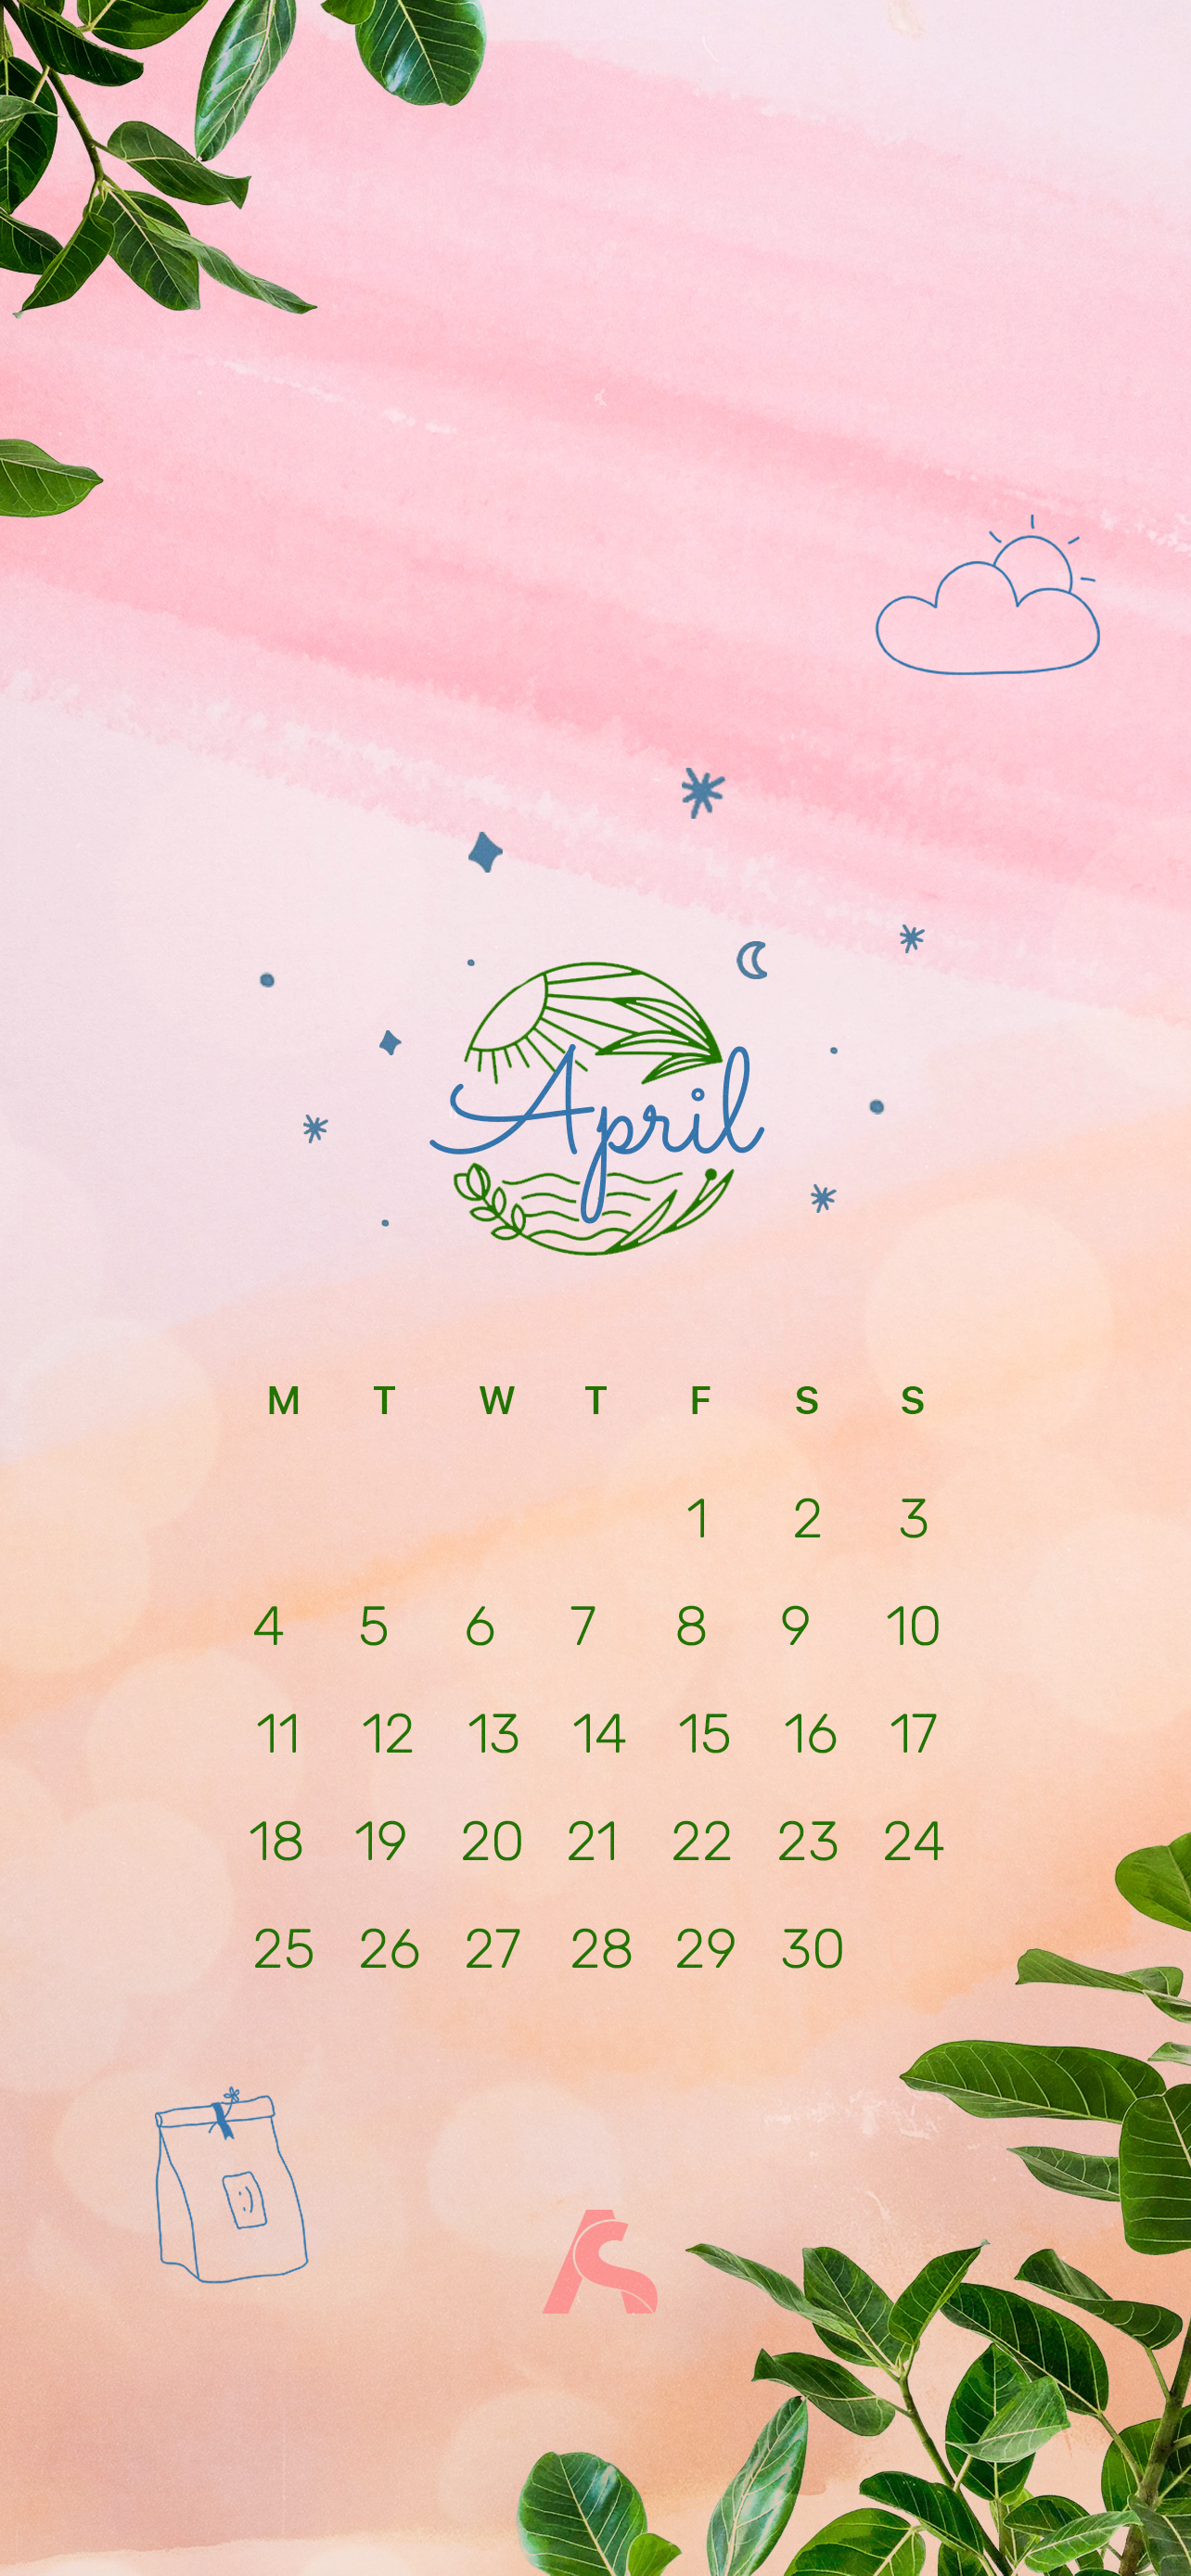 April 2022 Wallpaper: Best Earth Day Wallpaper for iPhone